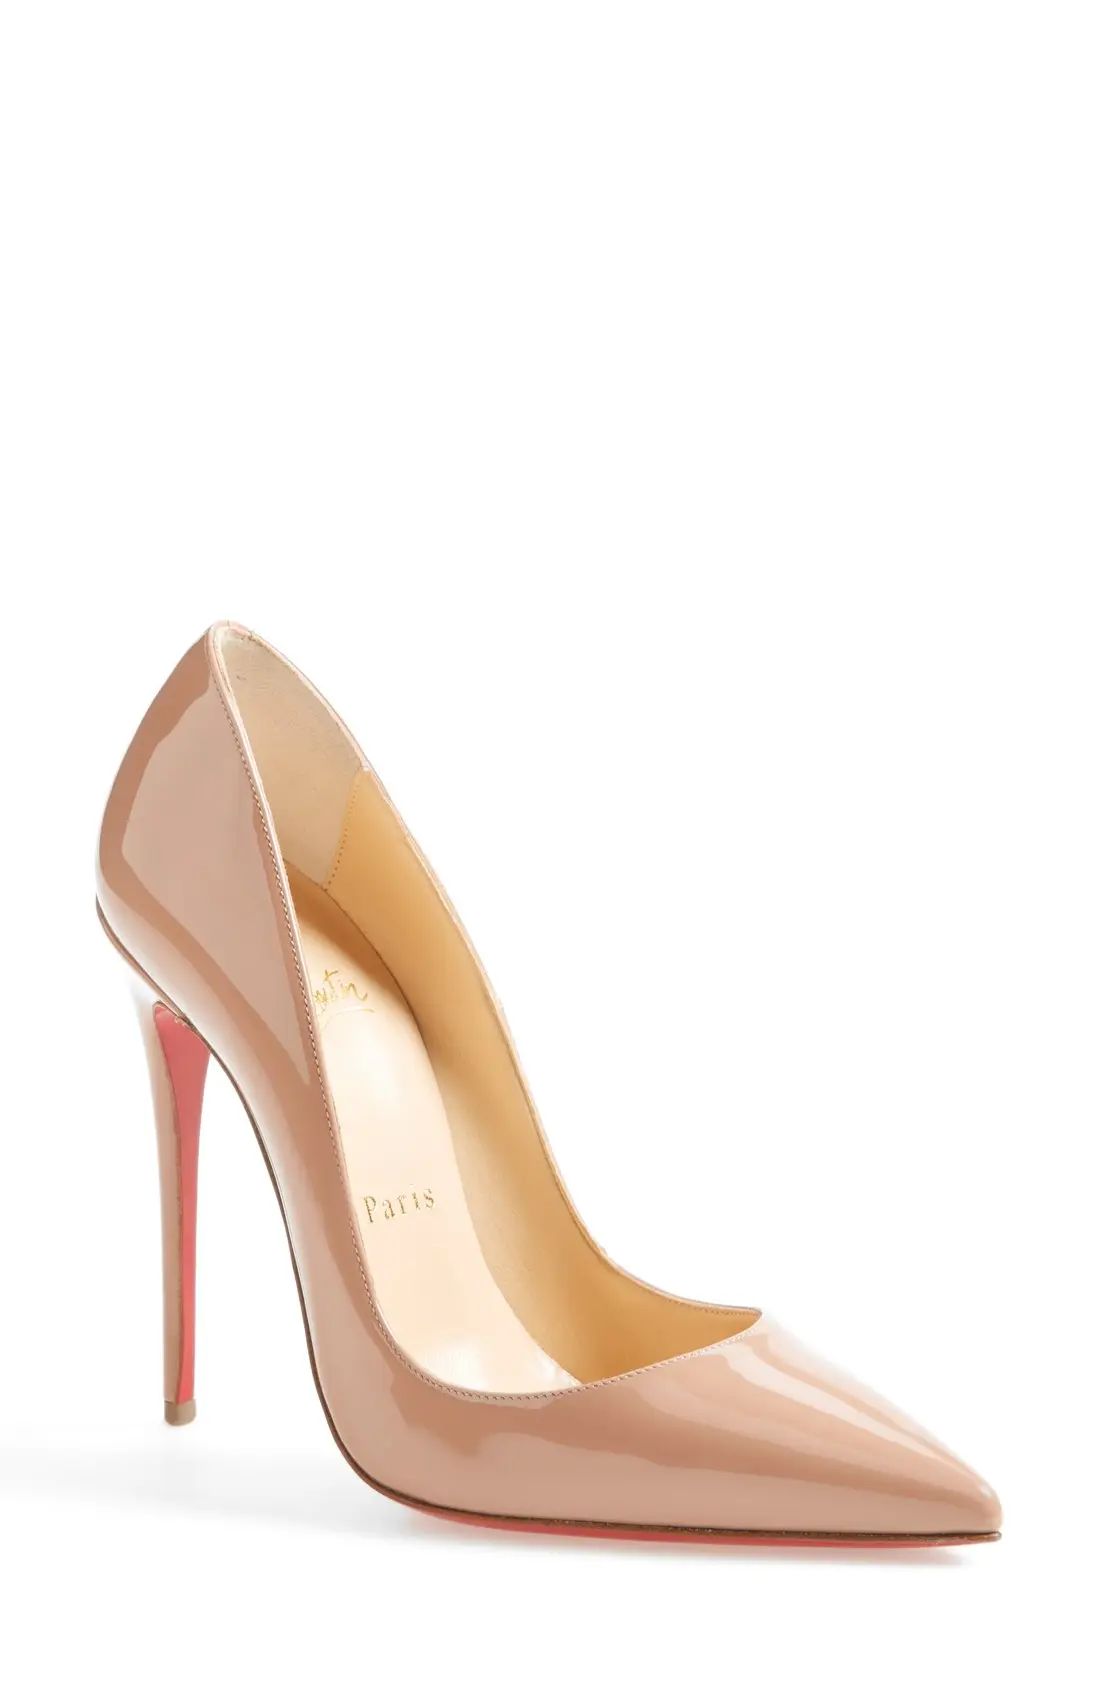 Women's Christian Louboutin So Kate Pointed Toe Pump, Size 6US - Beige | Nordstrom